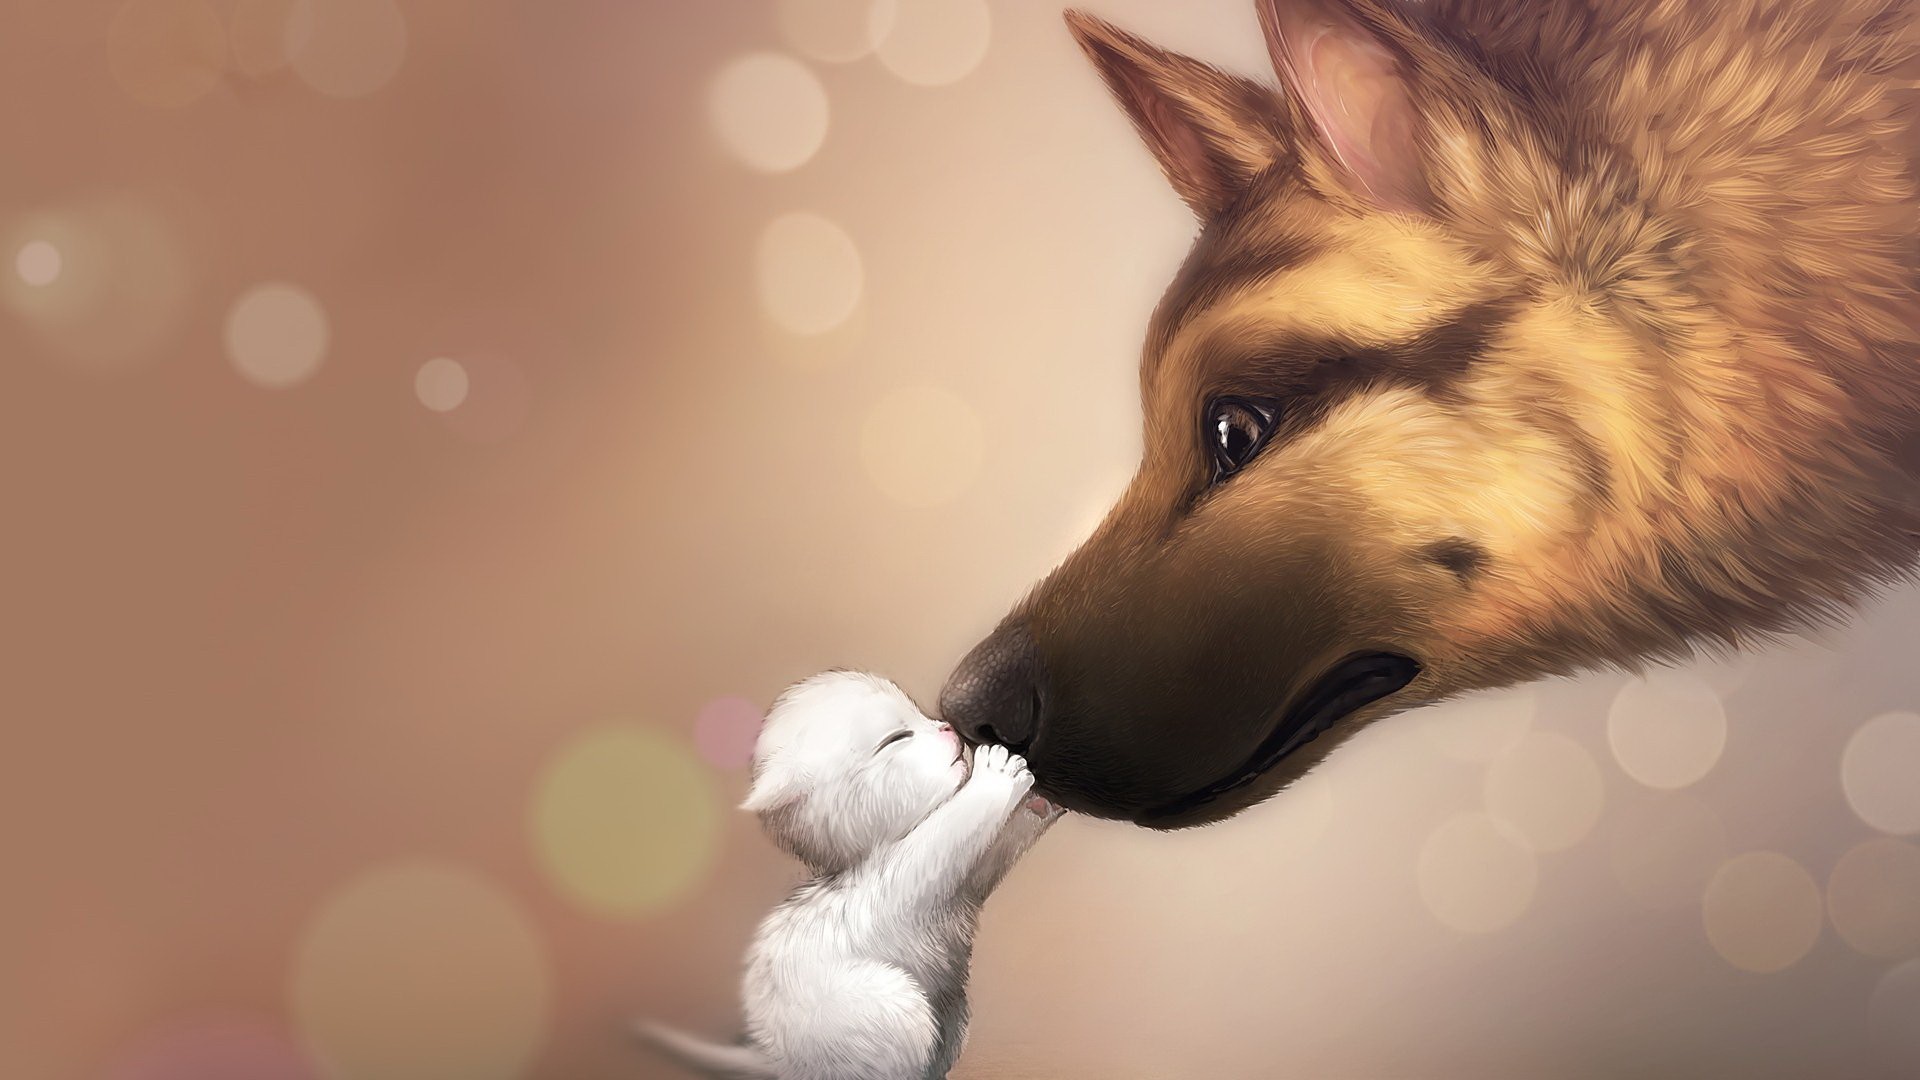 1920x1080 One of the cutest Wallpapers I've ever used.